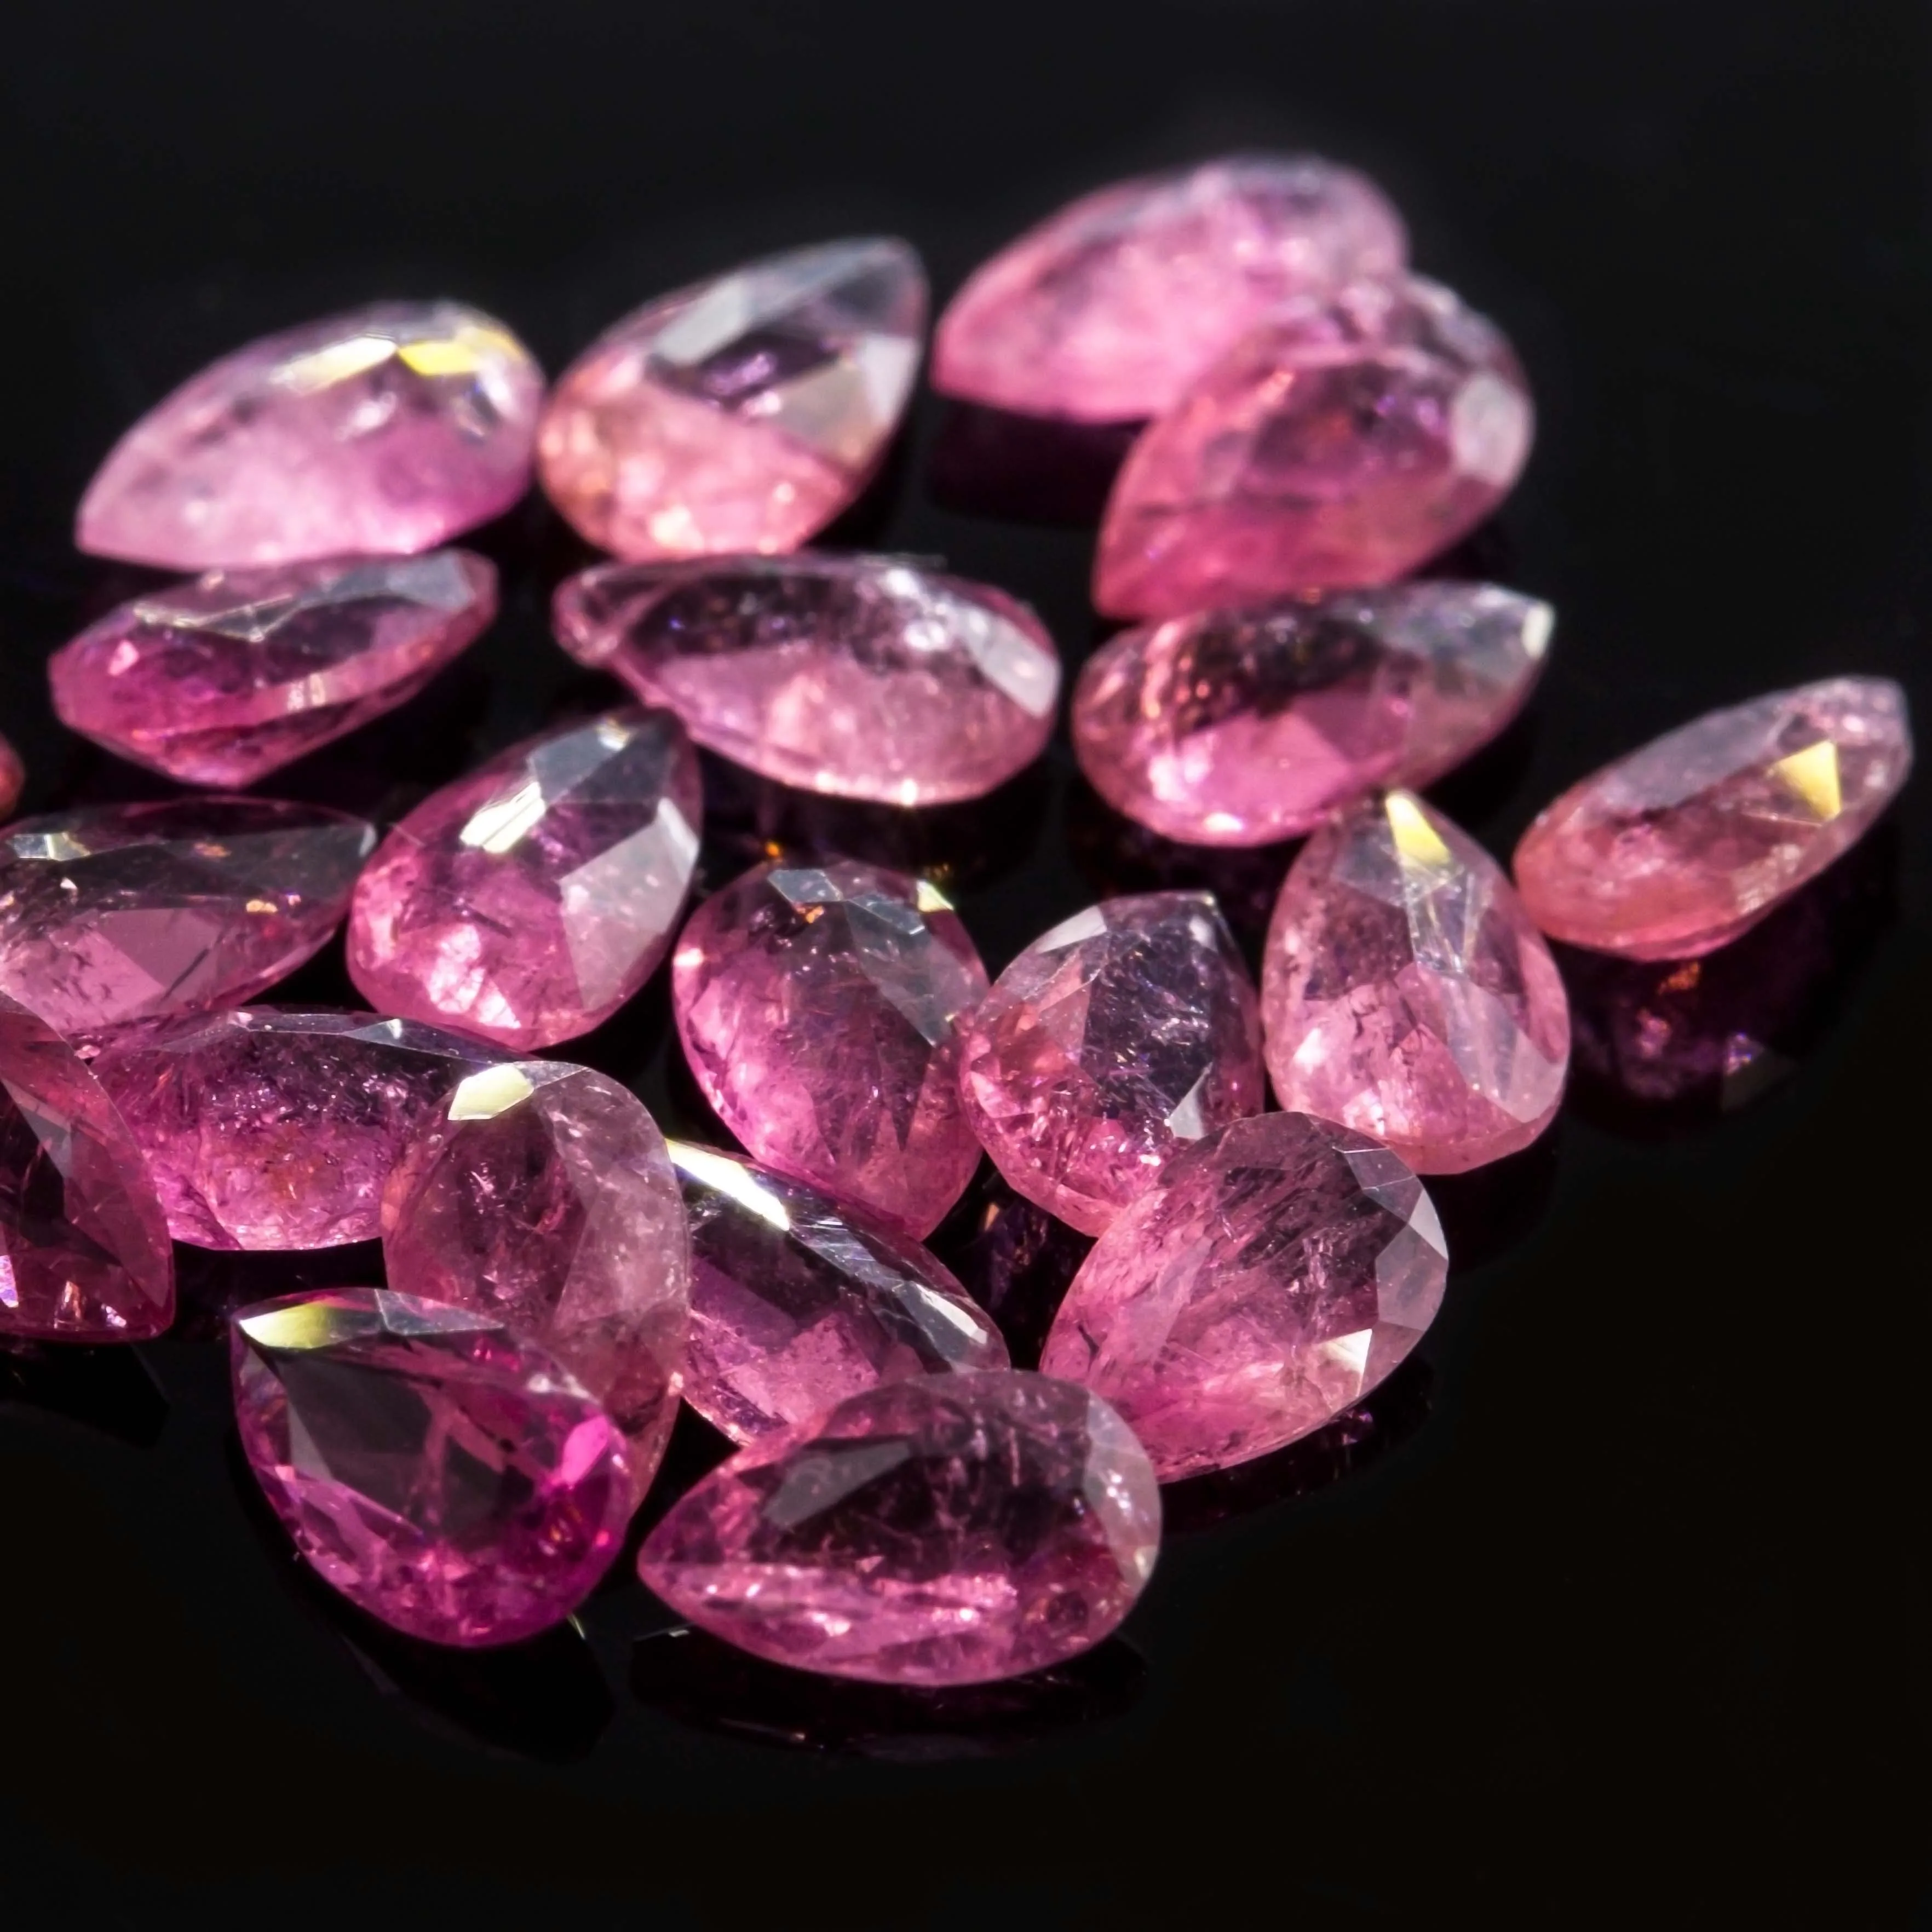 13X8X4 mm AS-26 Natural Pink Tourmaline Pear Shape Cut Stone Loose Gemstone For Making Jewelry 2.47 Ct